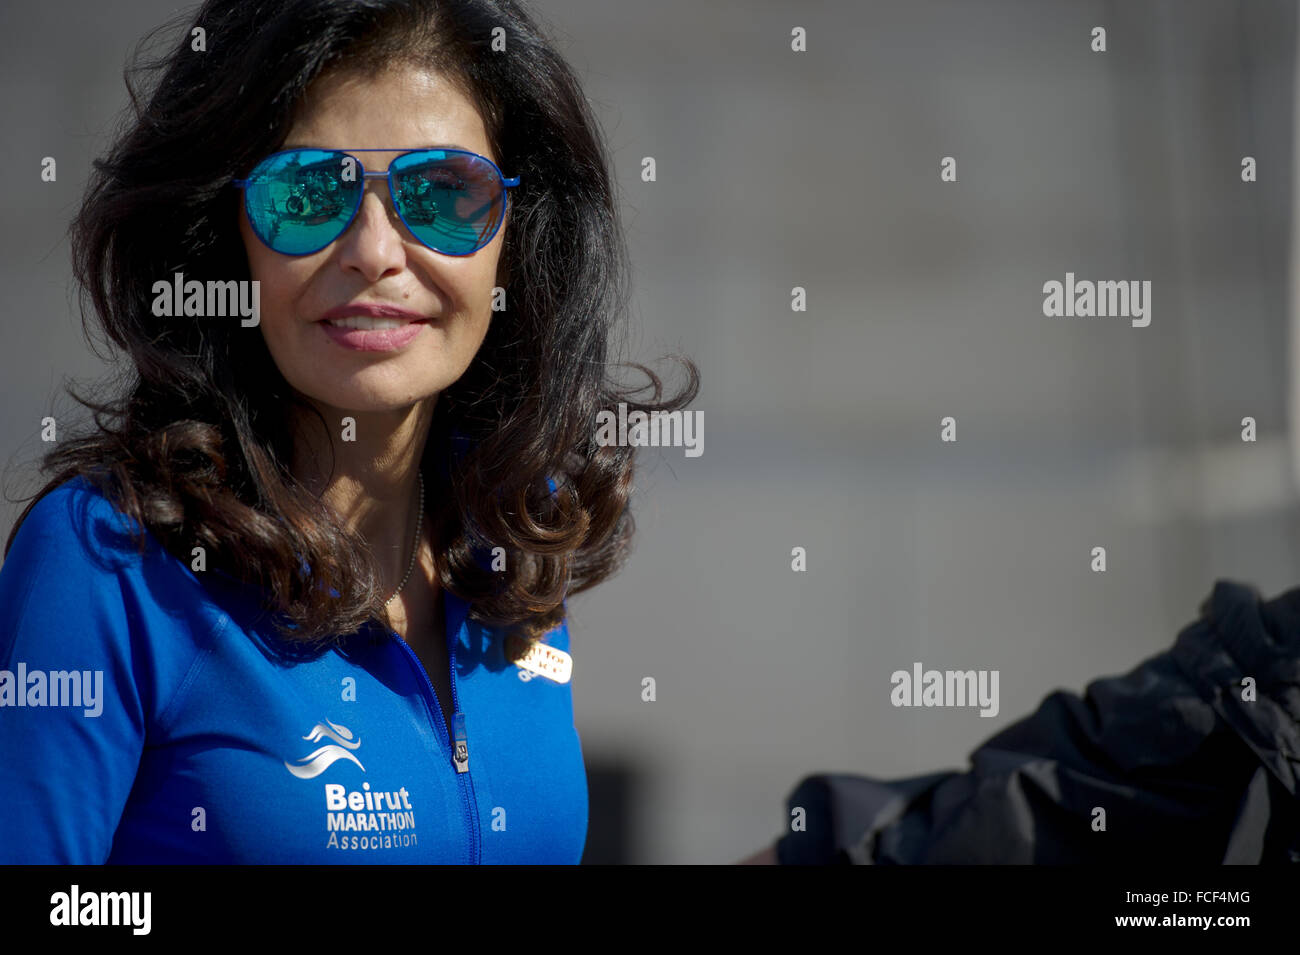 May El Khalil is the founder and president of the Beirut Marathon Association Stock Photo